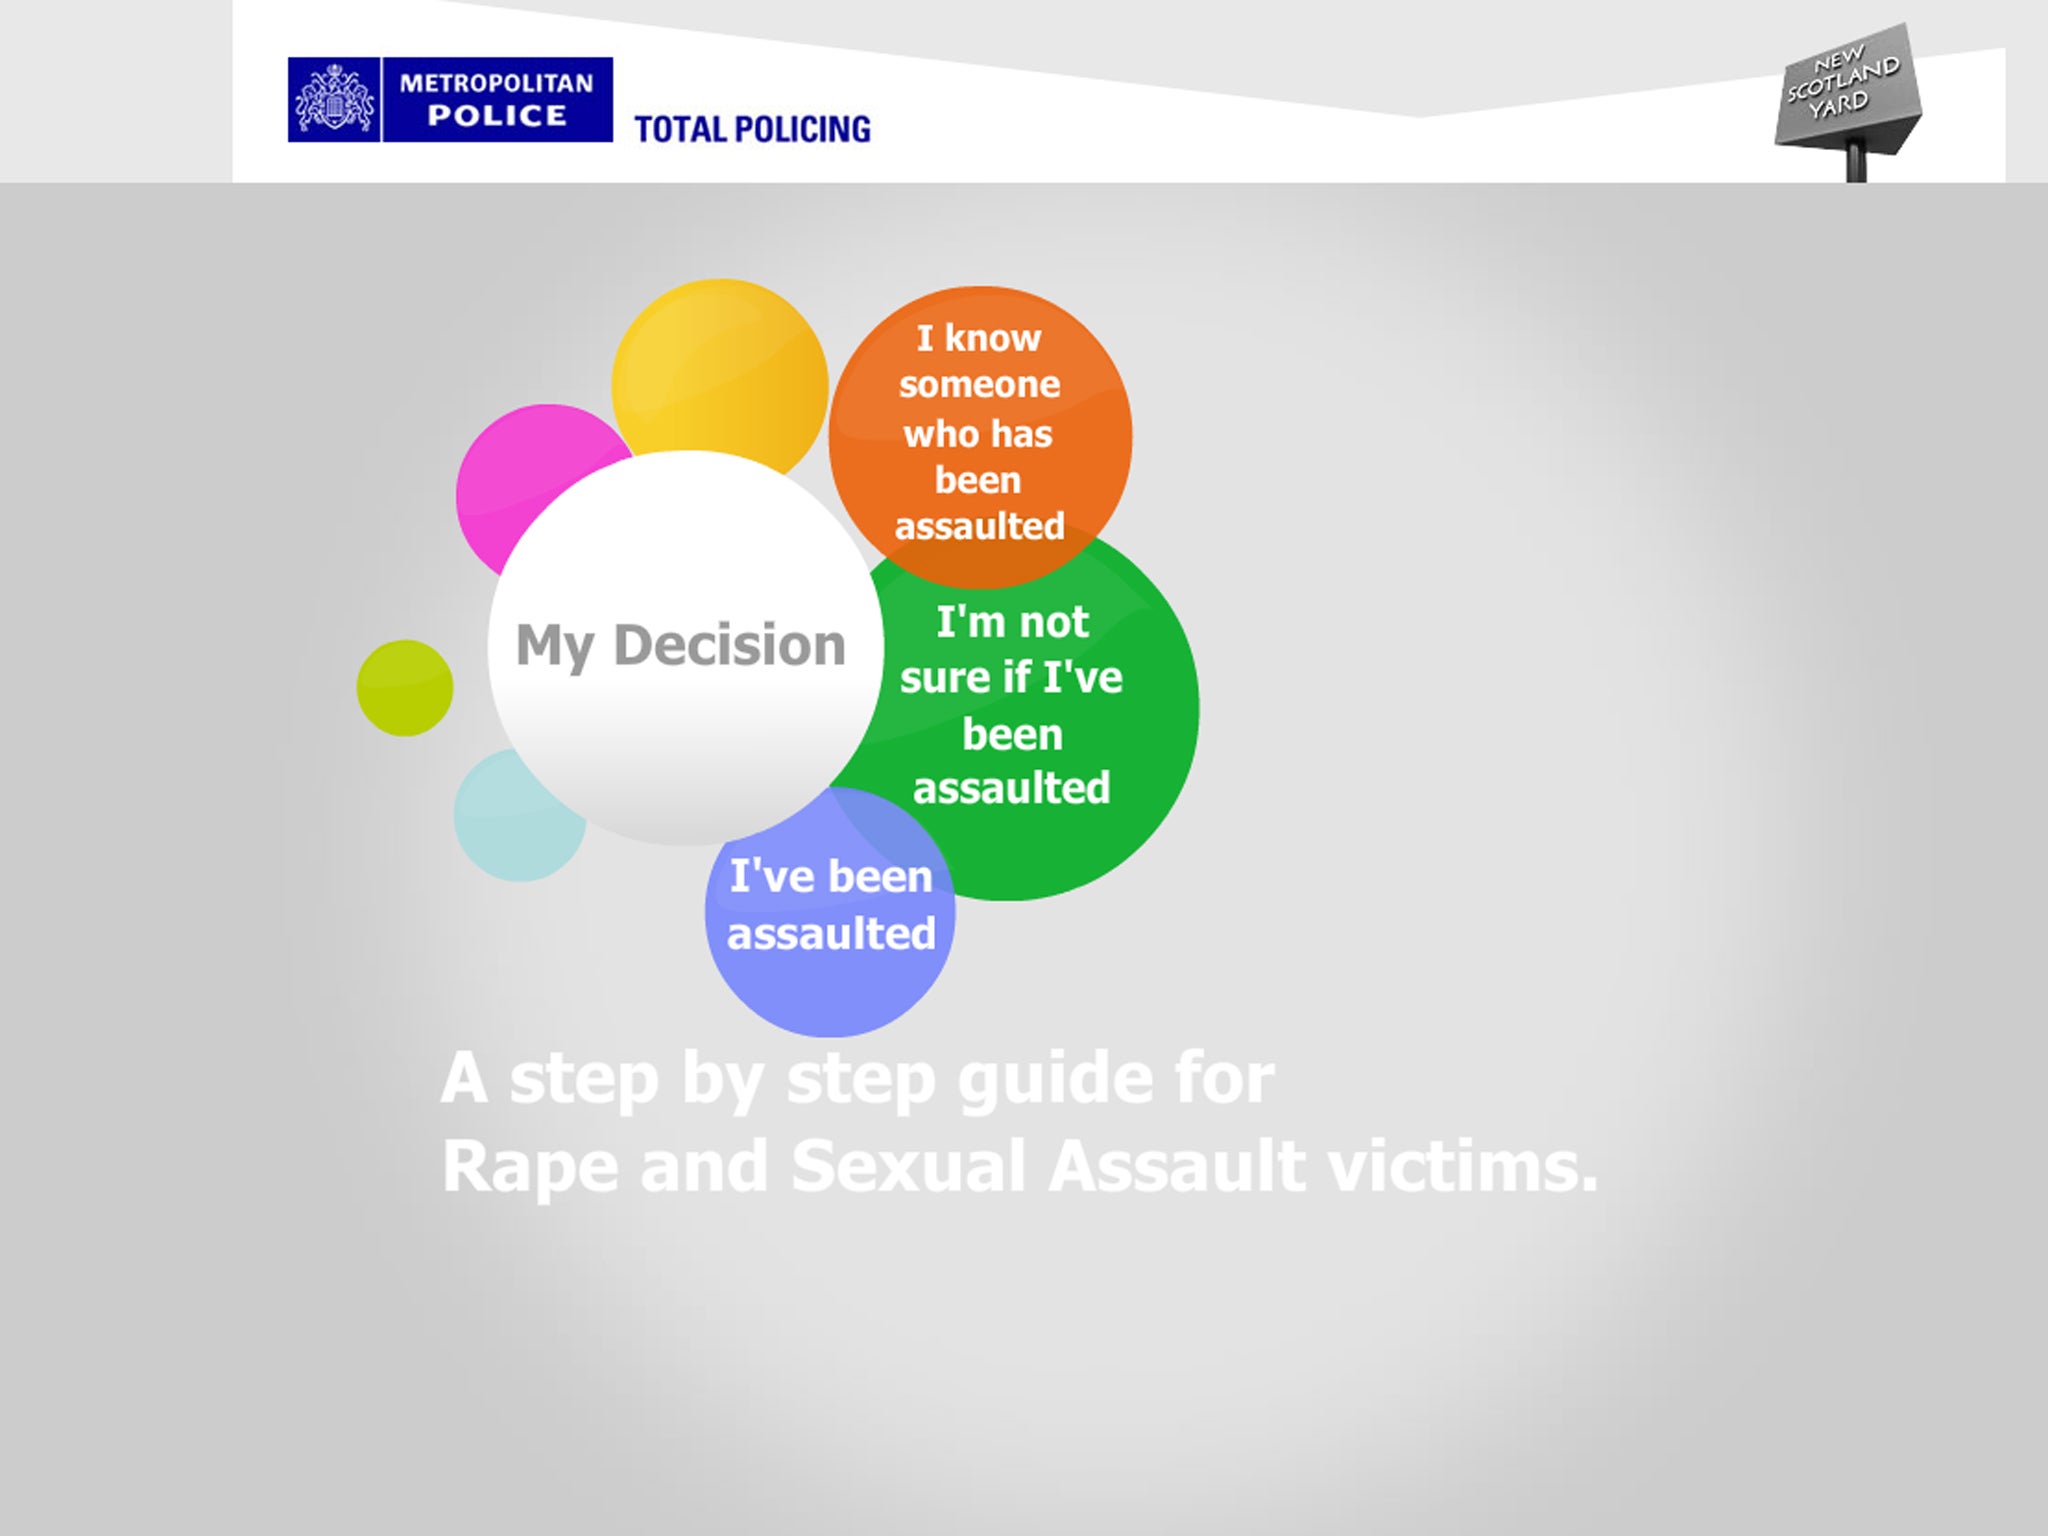 The website takes the victim through a list of options to report crimes or to seek help after attack